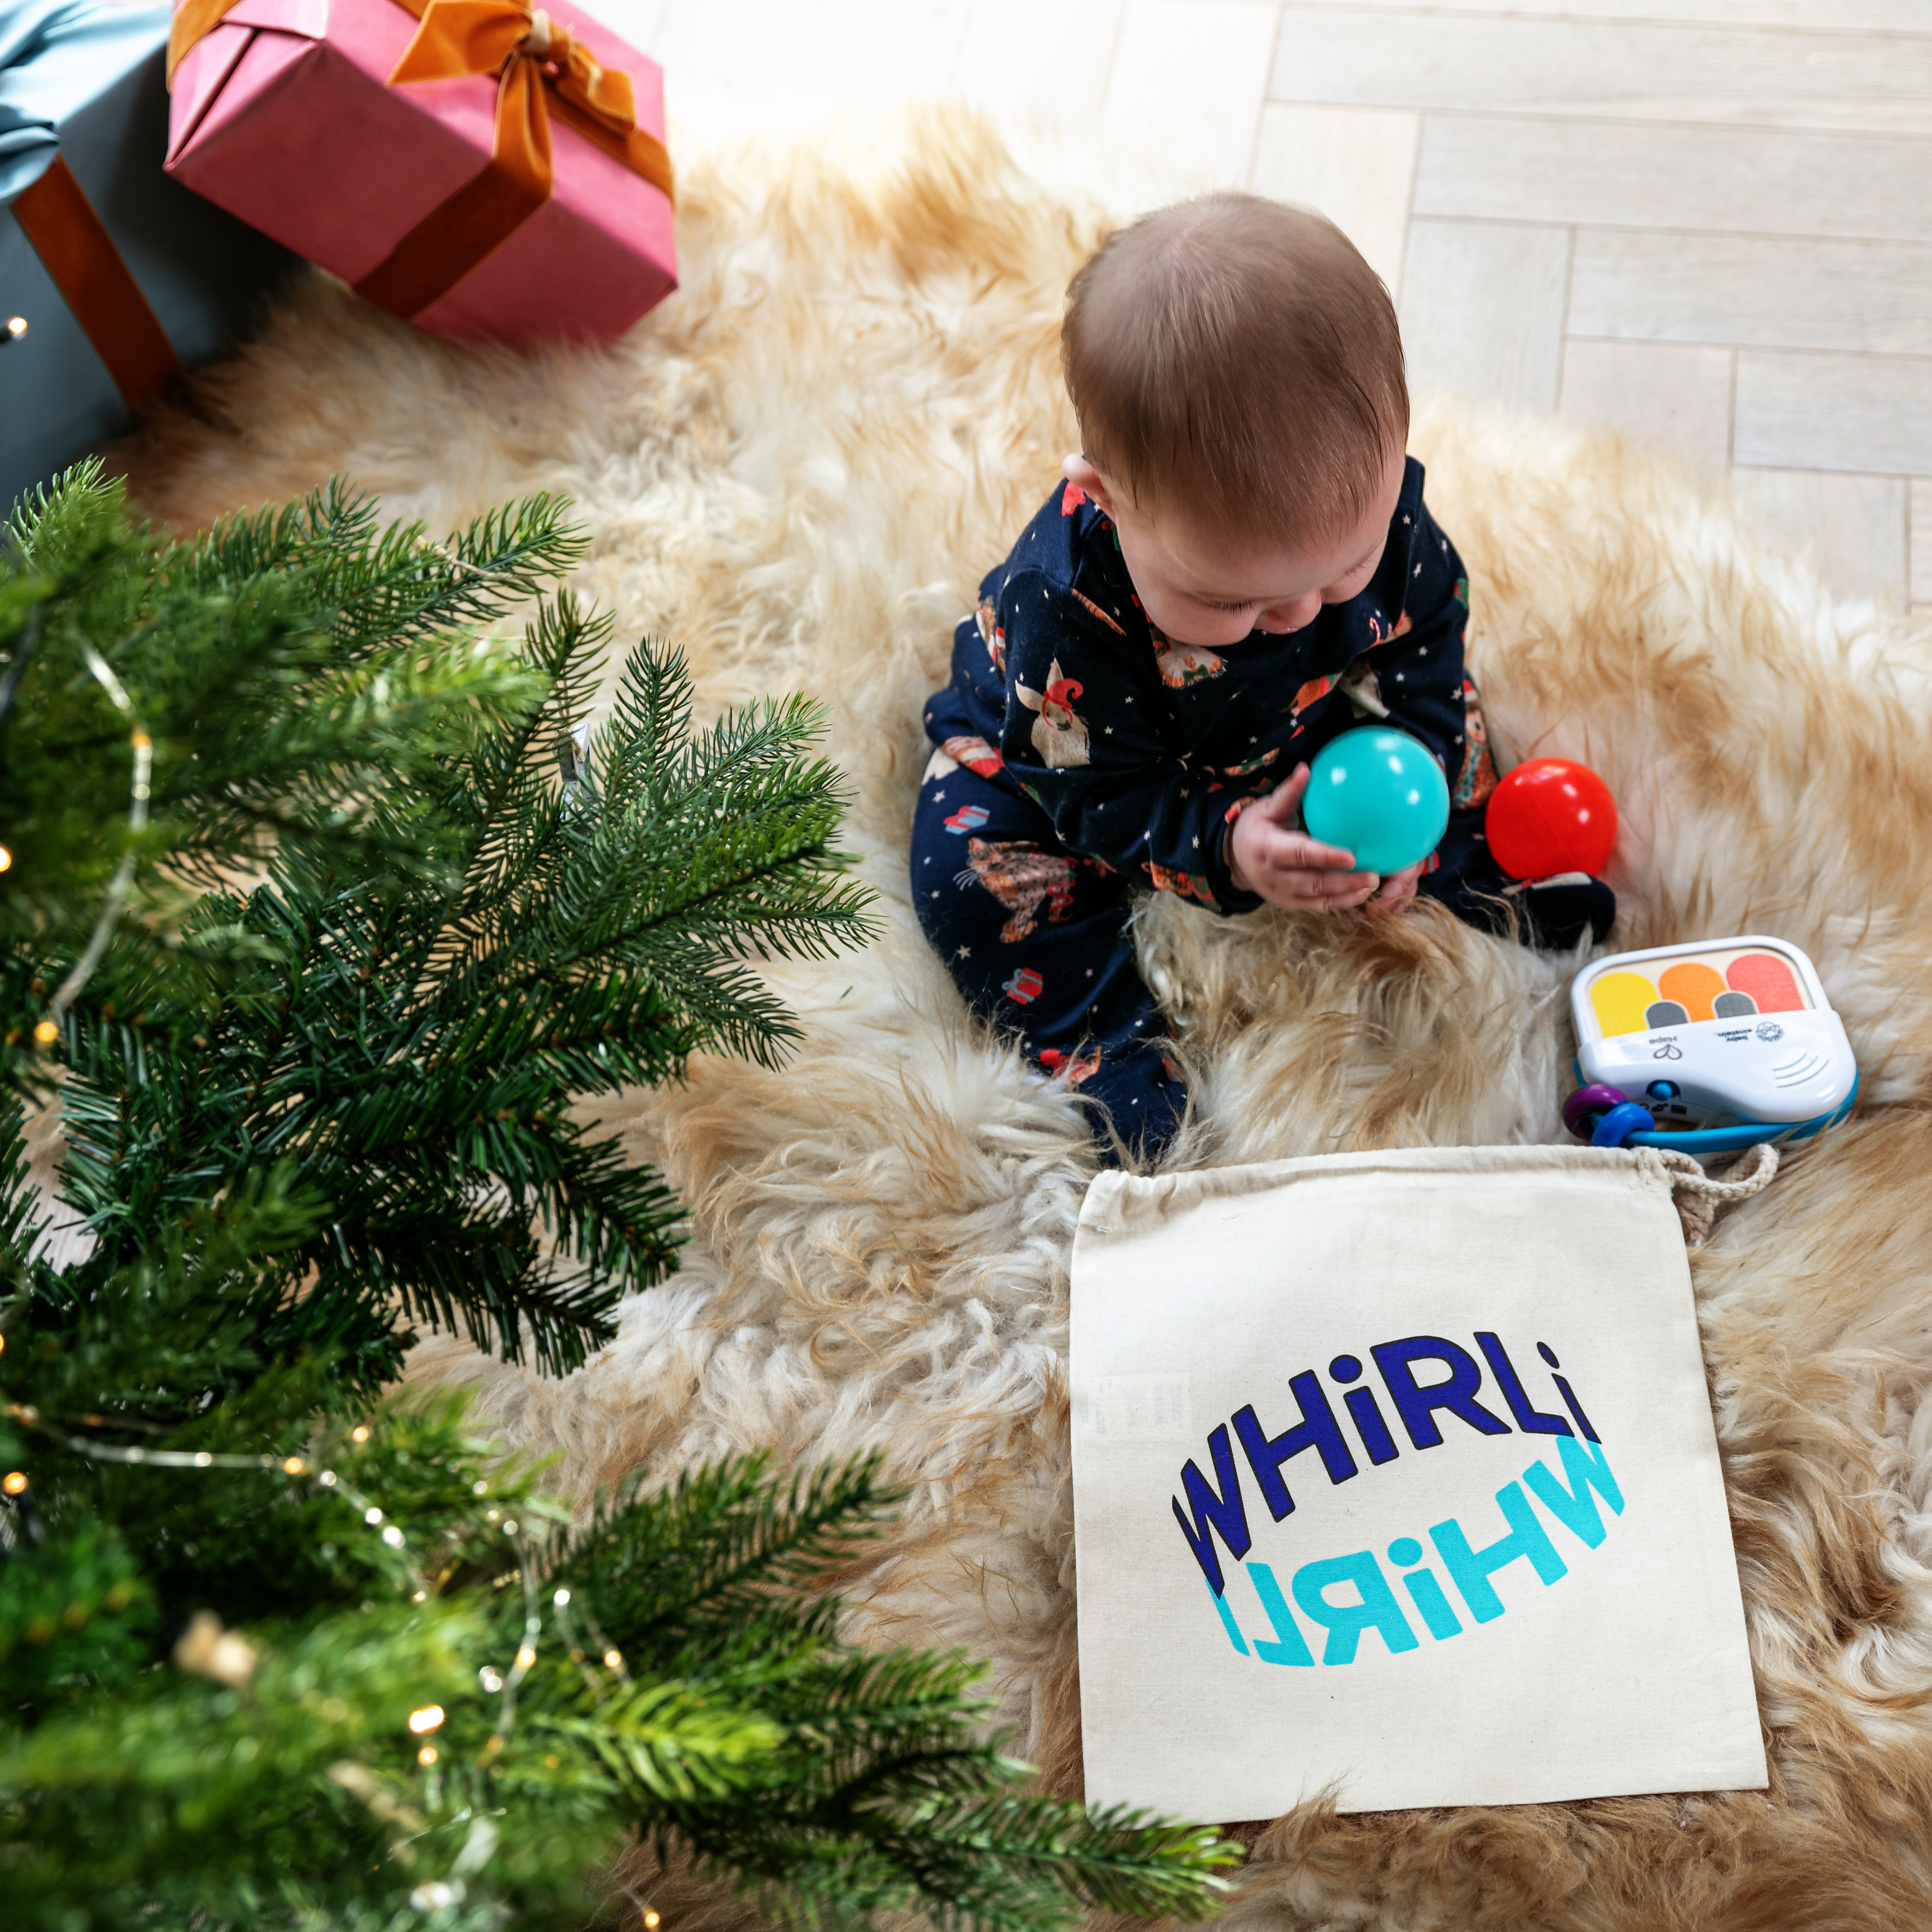 Borrow toys from Whirli for a green Christmas